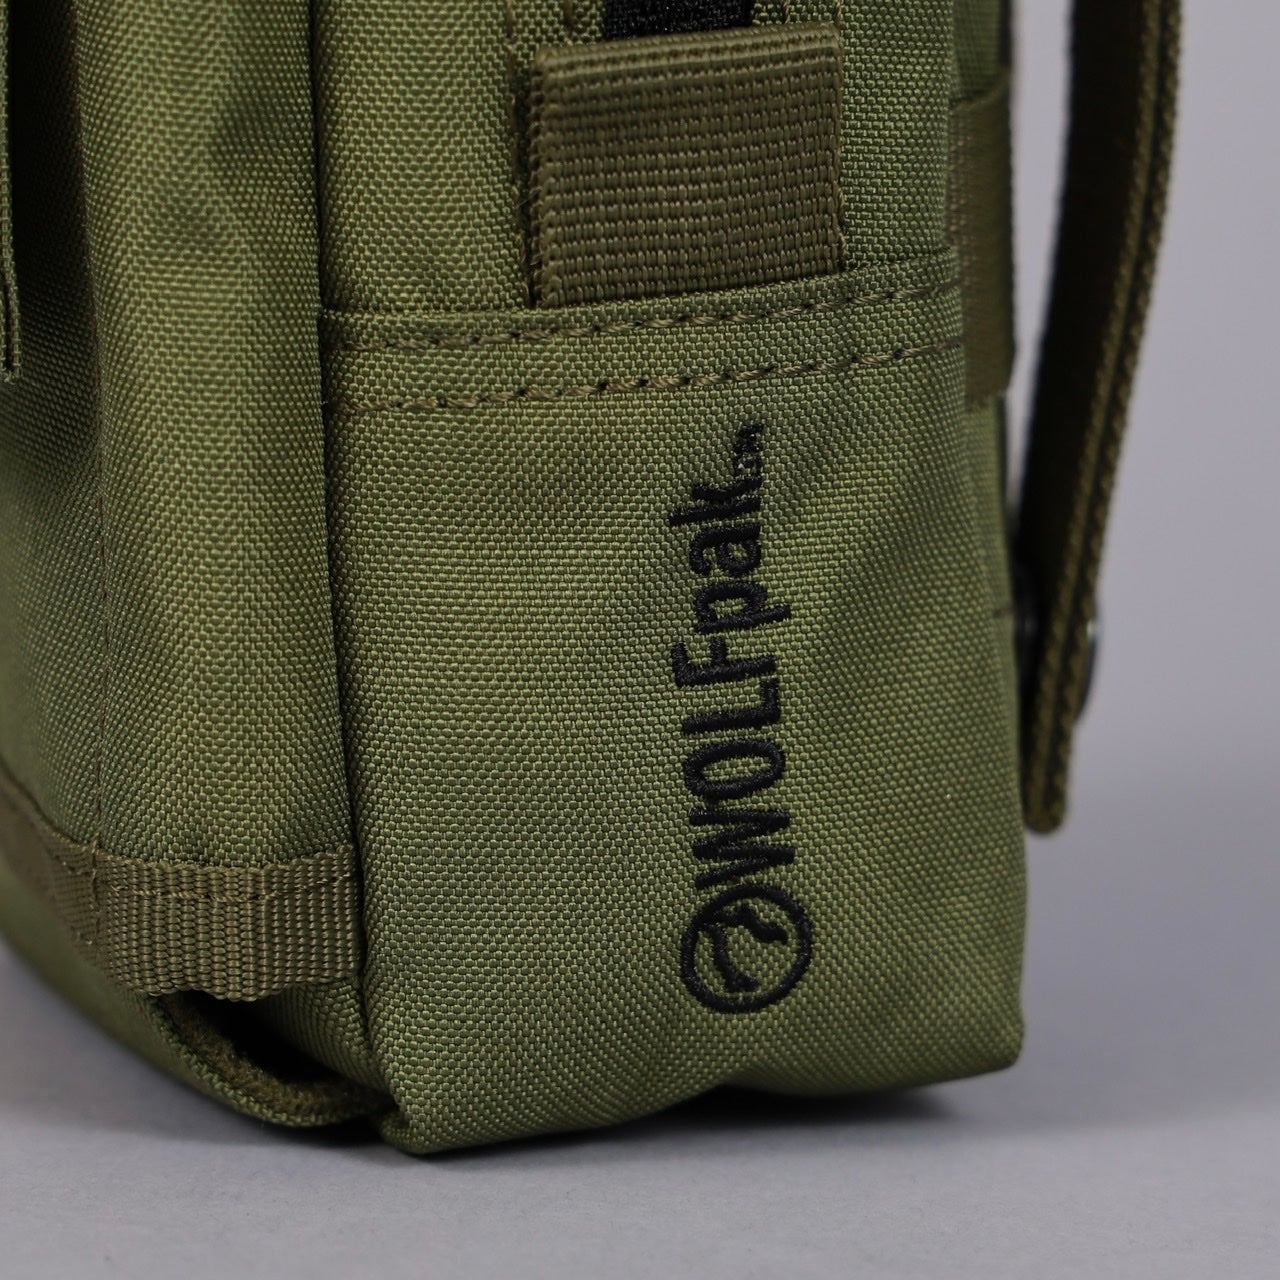 Tactical EDC Pouch Attachment Bag Athletic Green